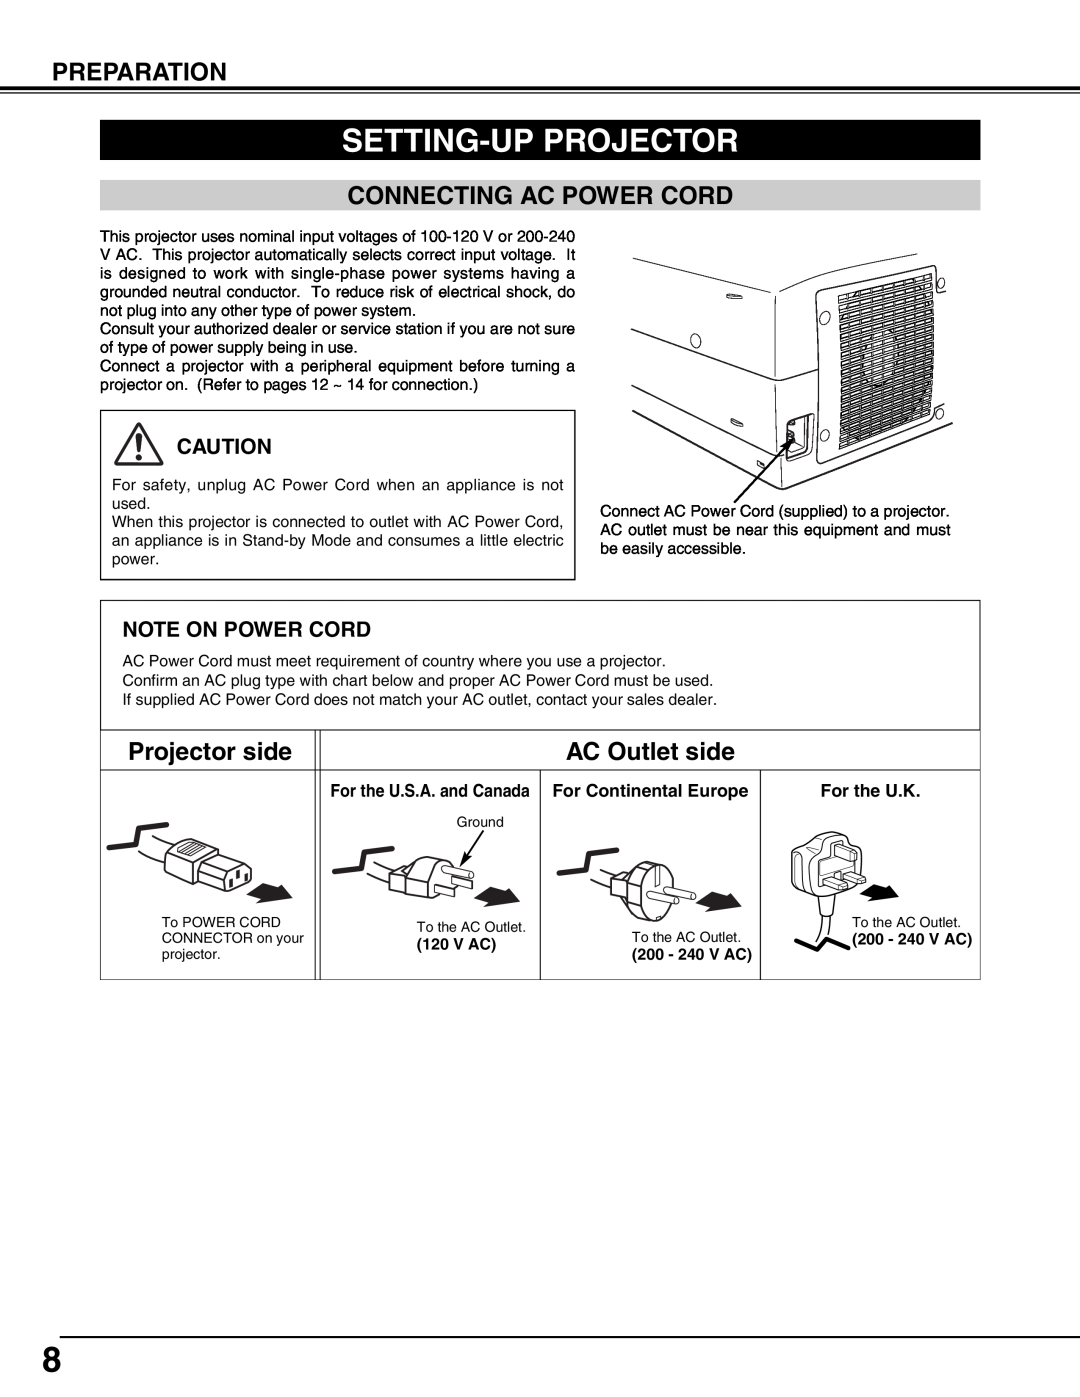 Sanyo PLV75L/PLV-80L, PLV-75/PLV-80 owner manual Setting-Up Projector, For the U.S.A. and Canada, V Ac, 200 - 240 V AC 